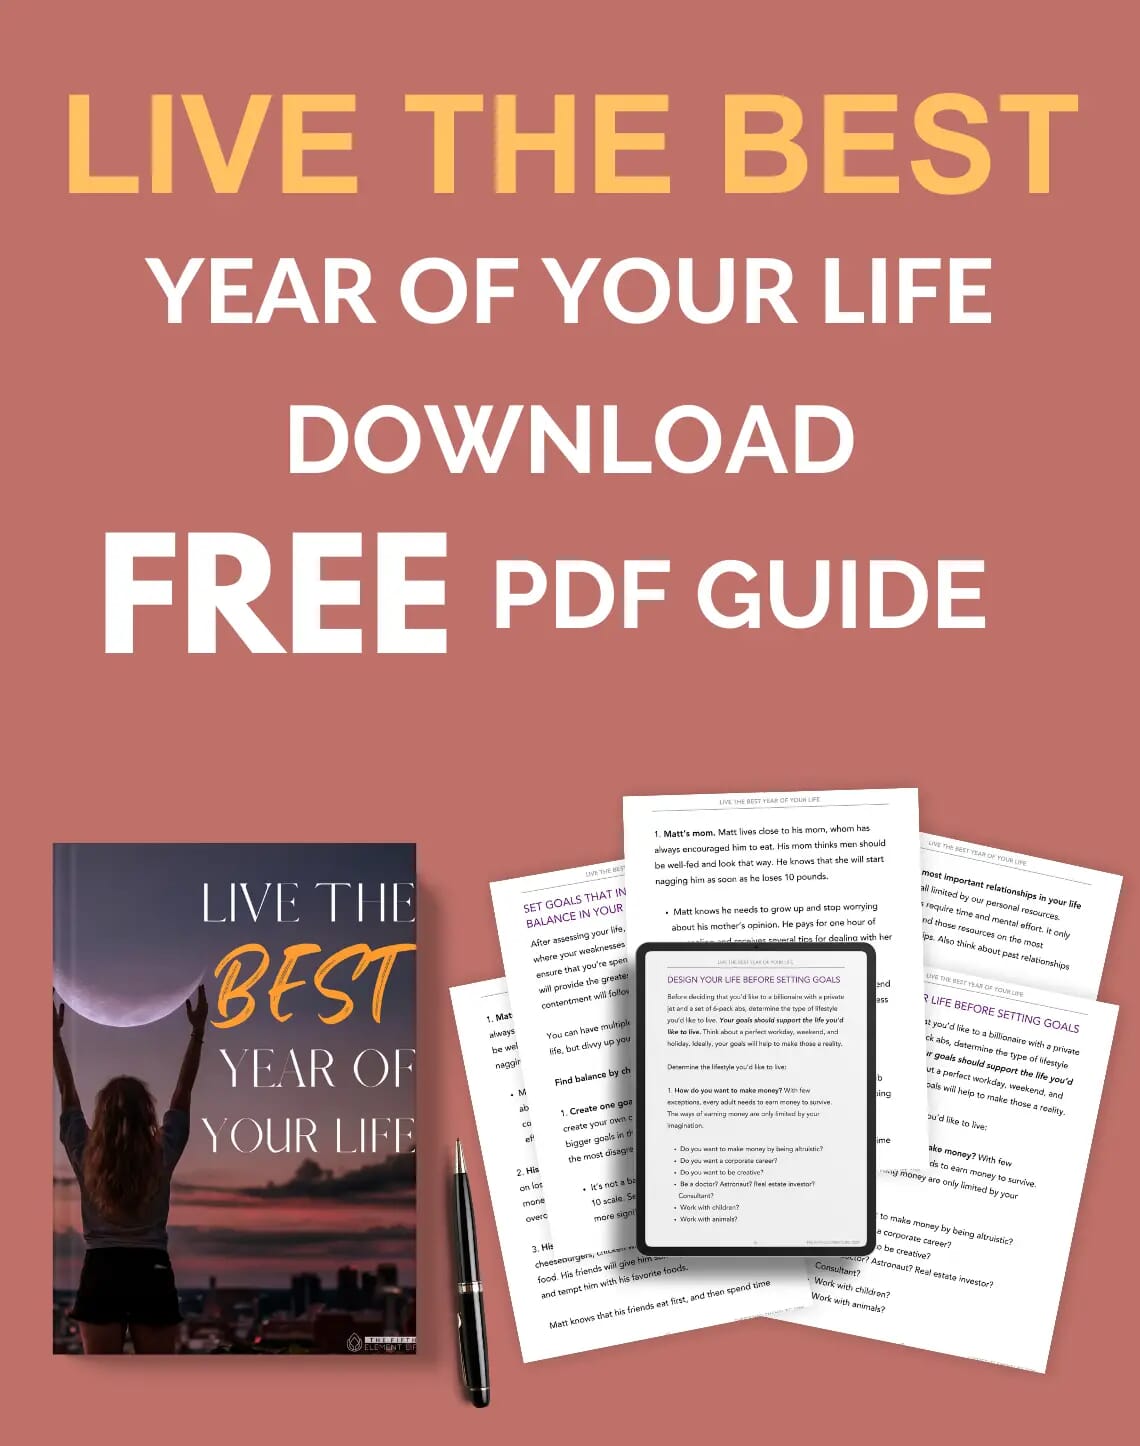 Discovering the Path to Fulfillment: “Live The Best Year Of Your Life”